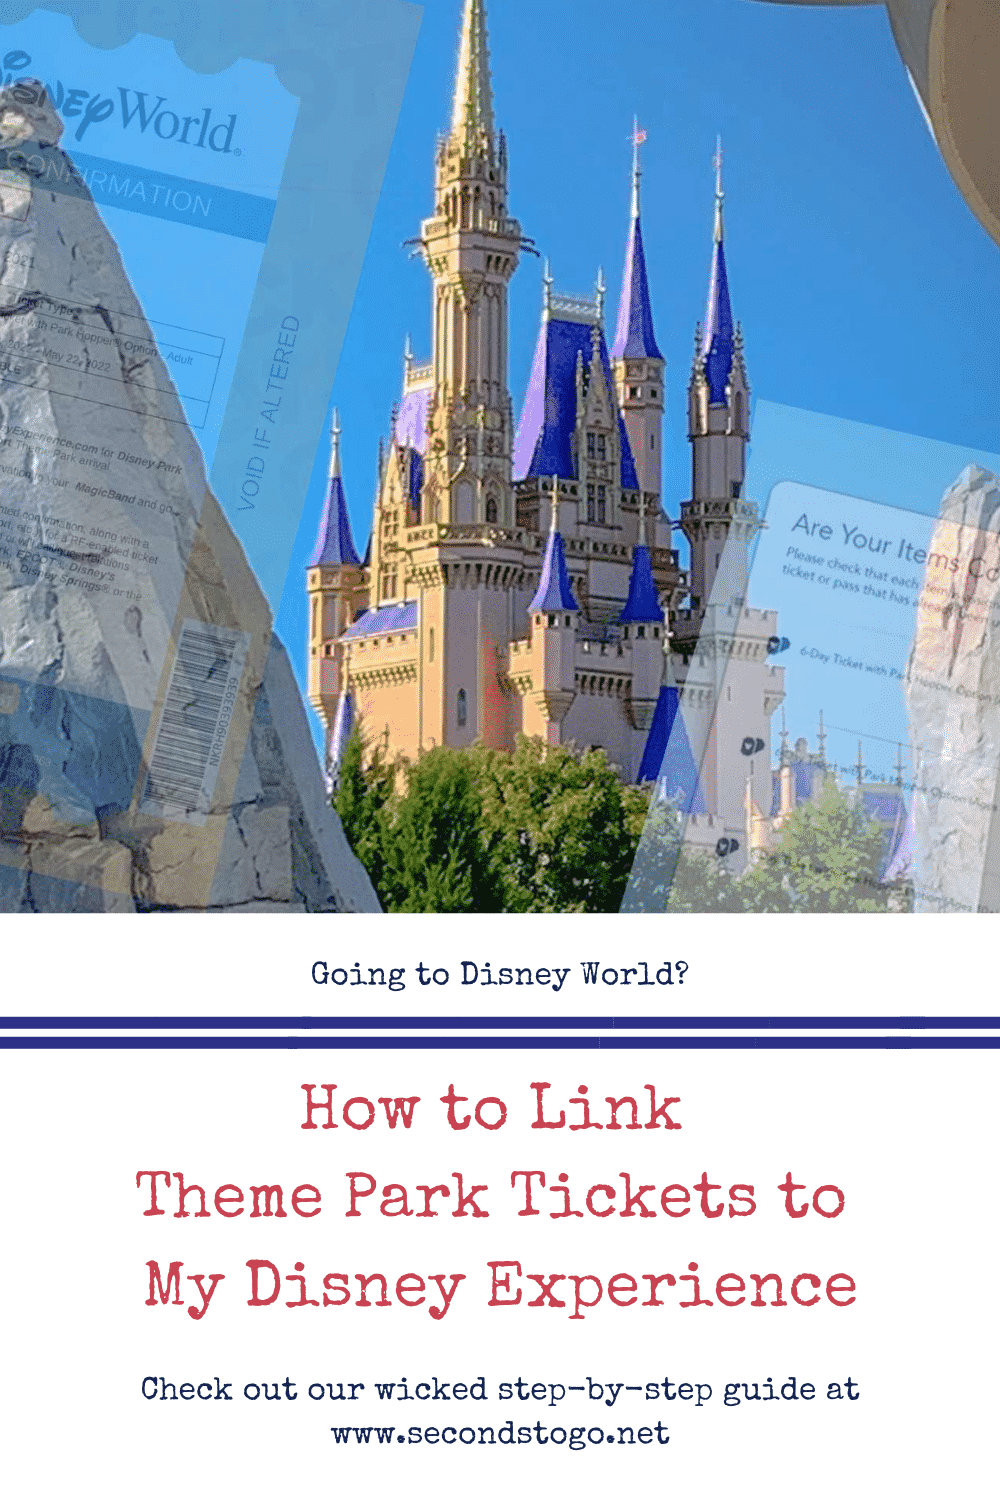 Step By Step Guide To The New Disney Park Pass Reservation System